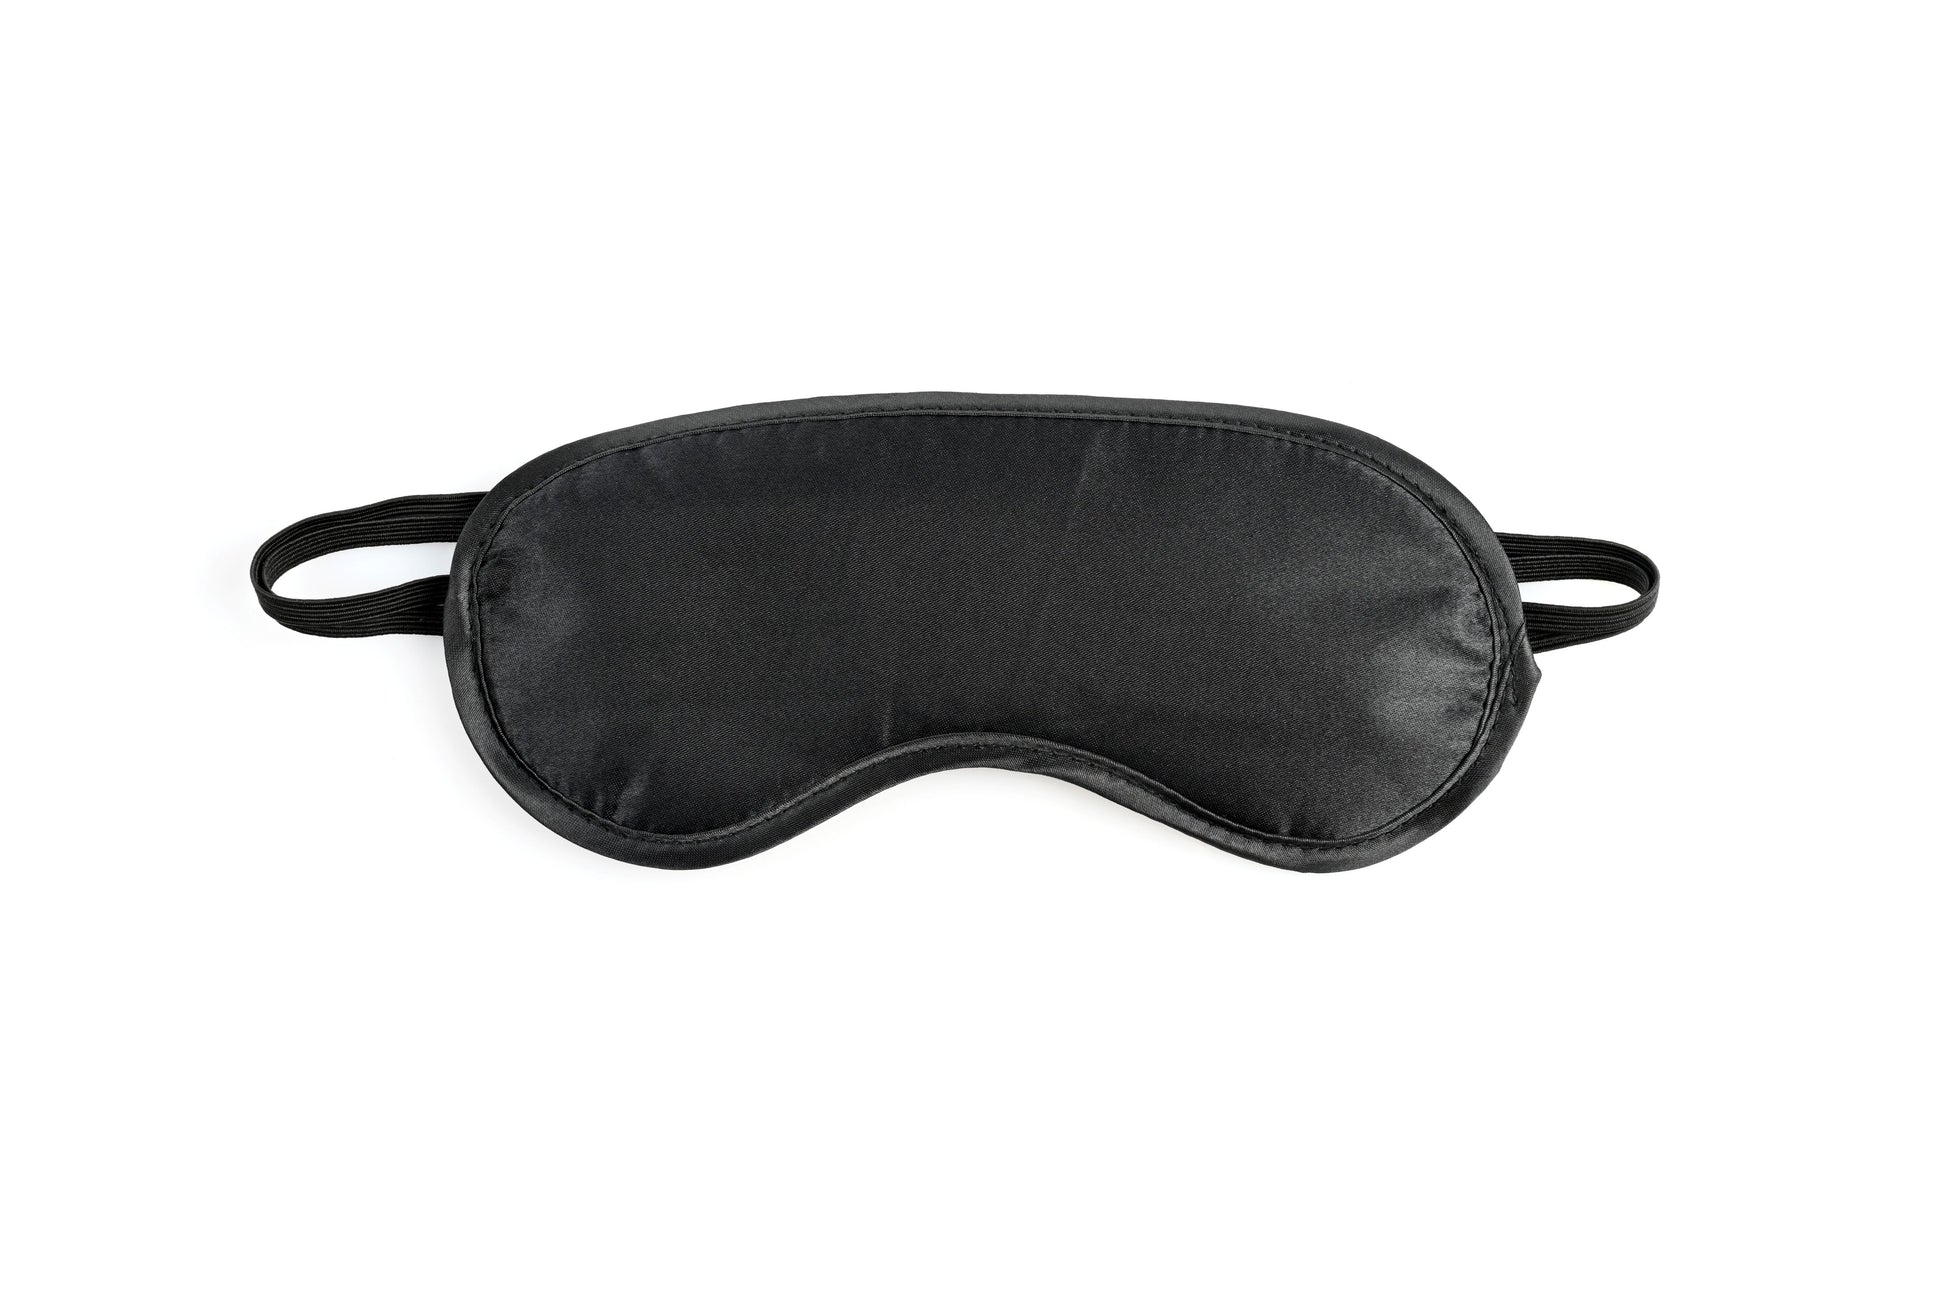 Close-up of the blindfold included with the set.